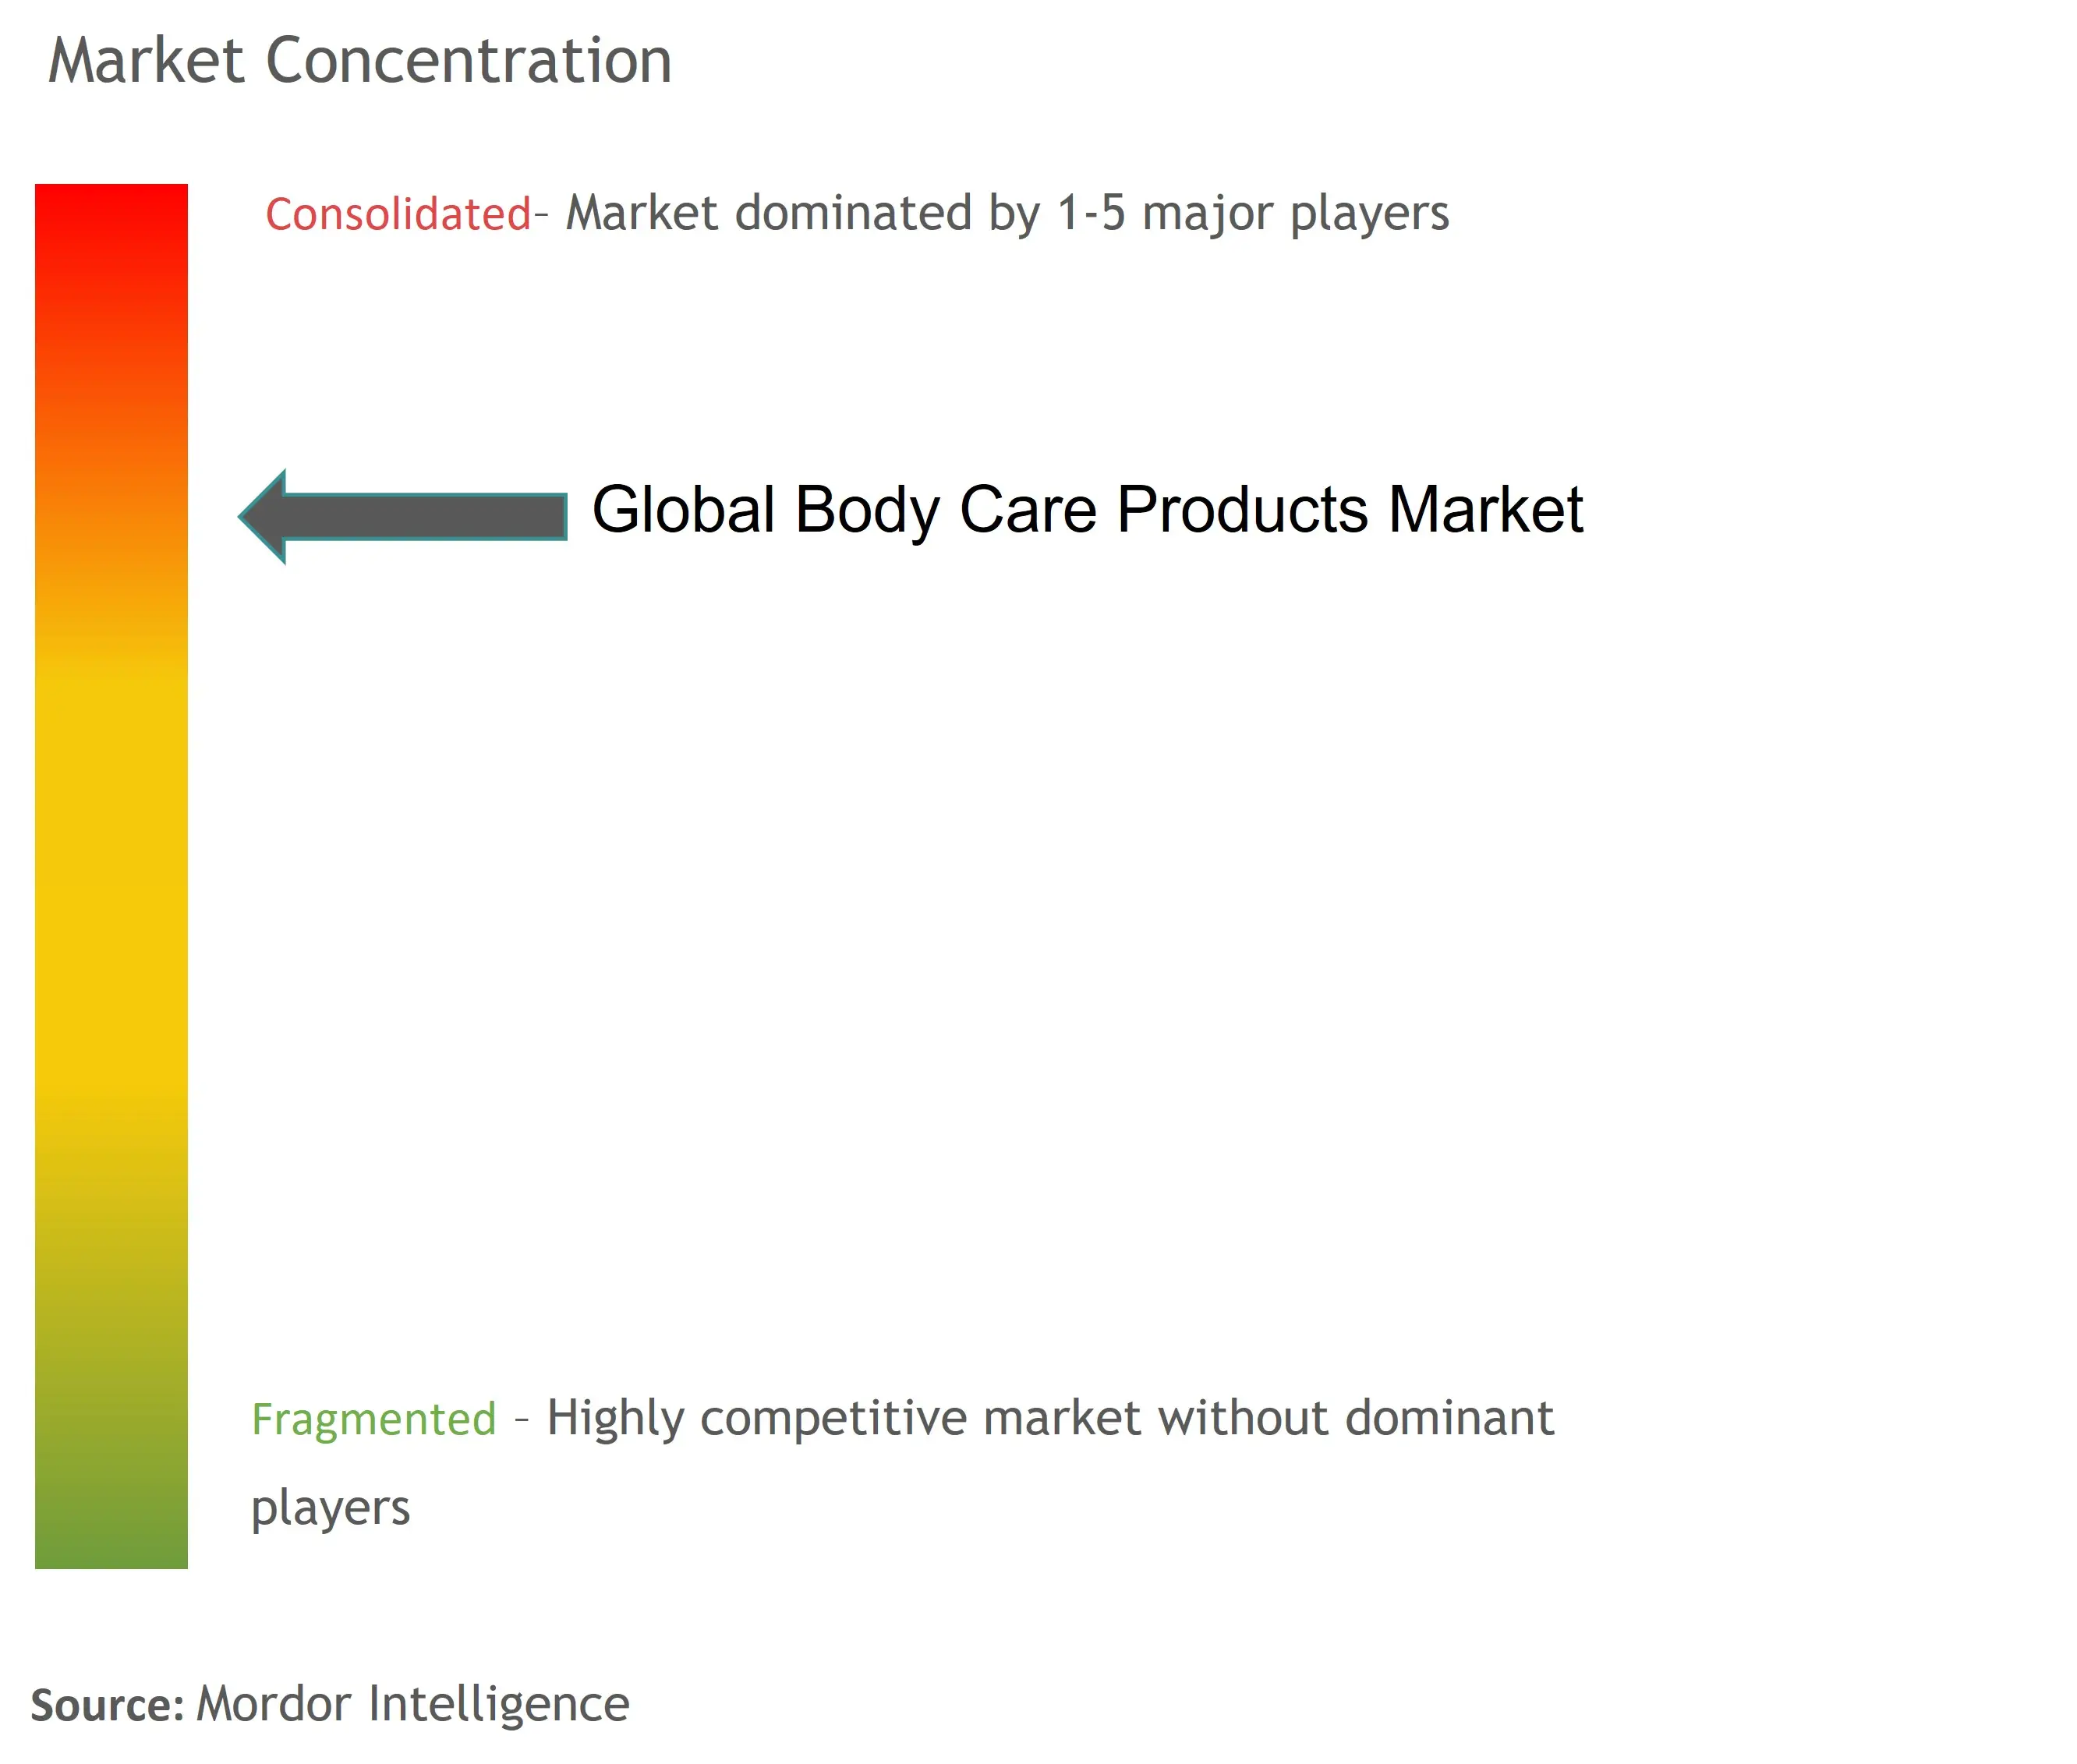 Body Care Product Market Concentration